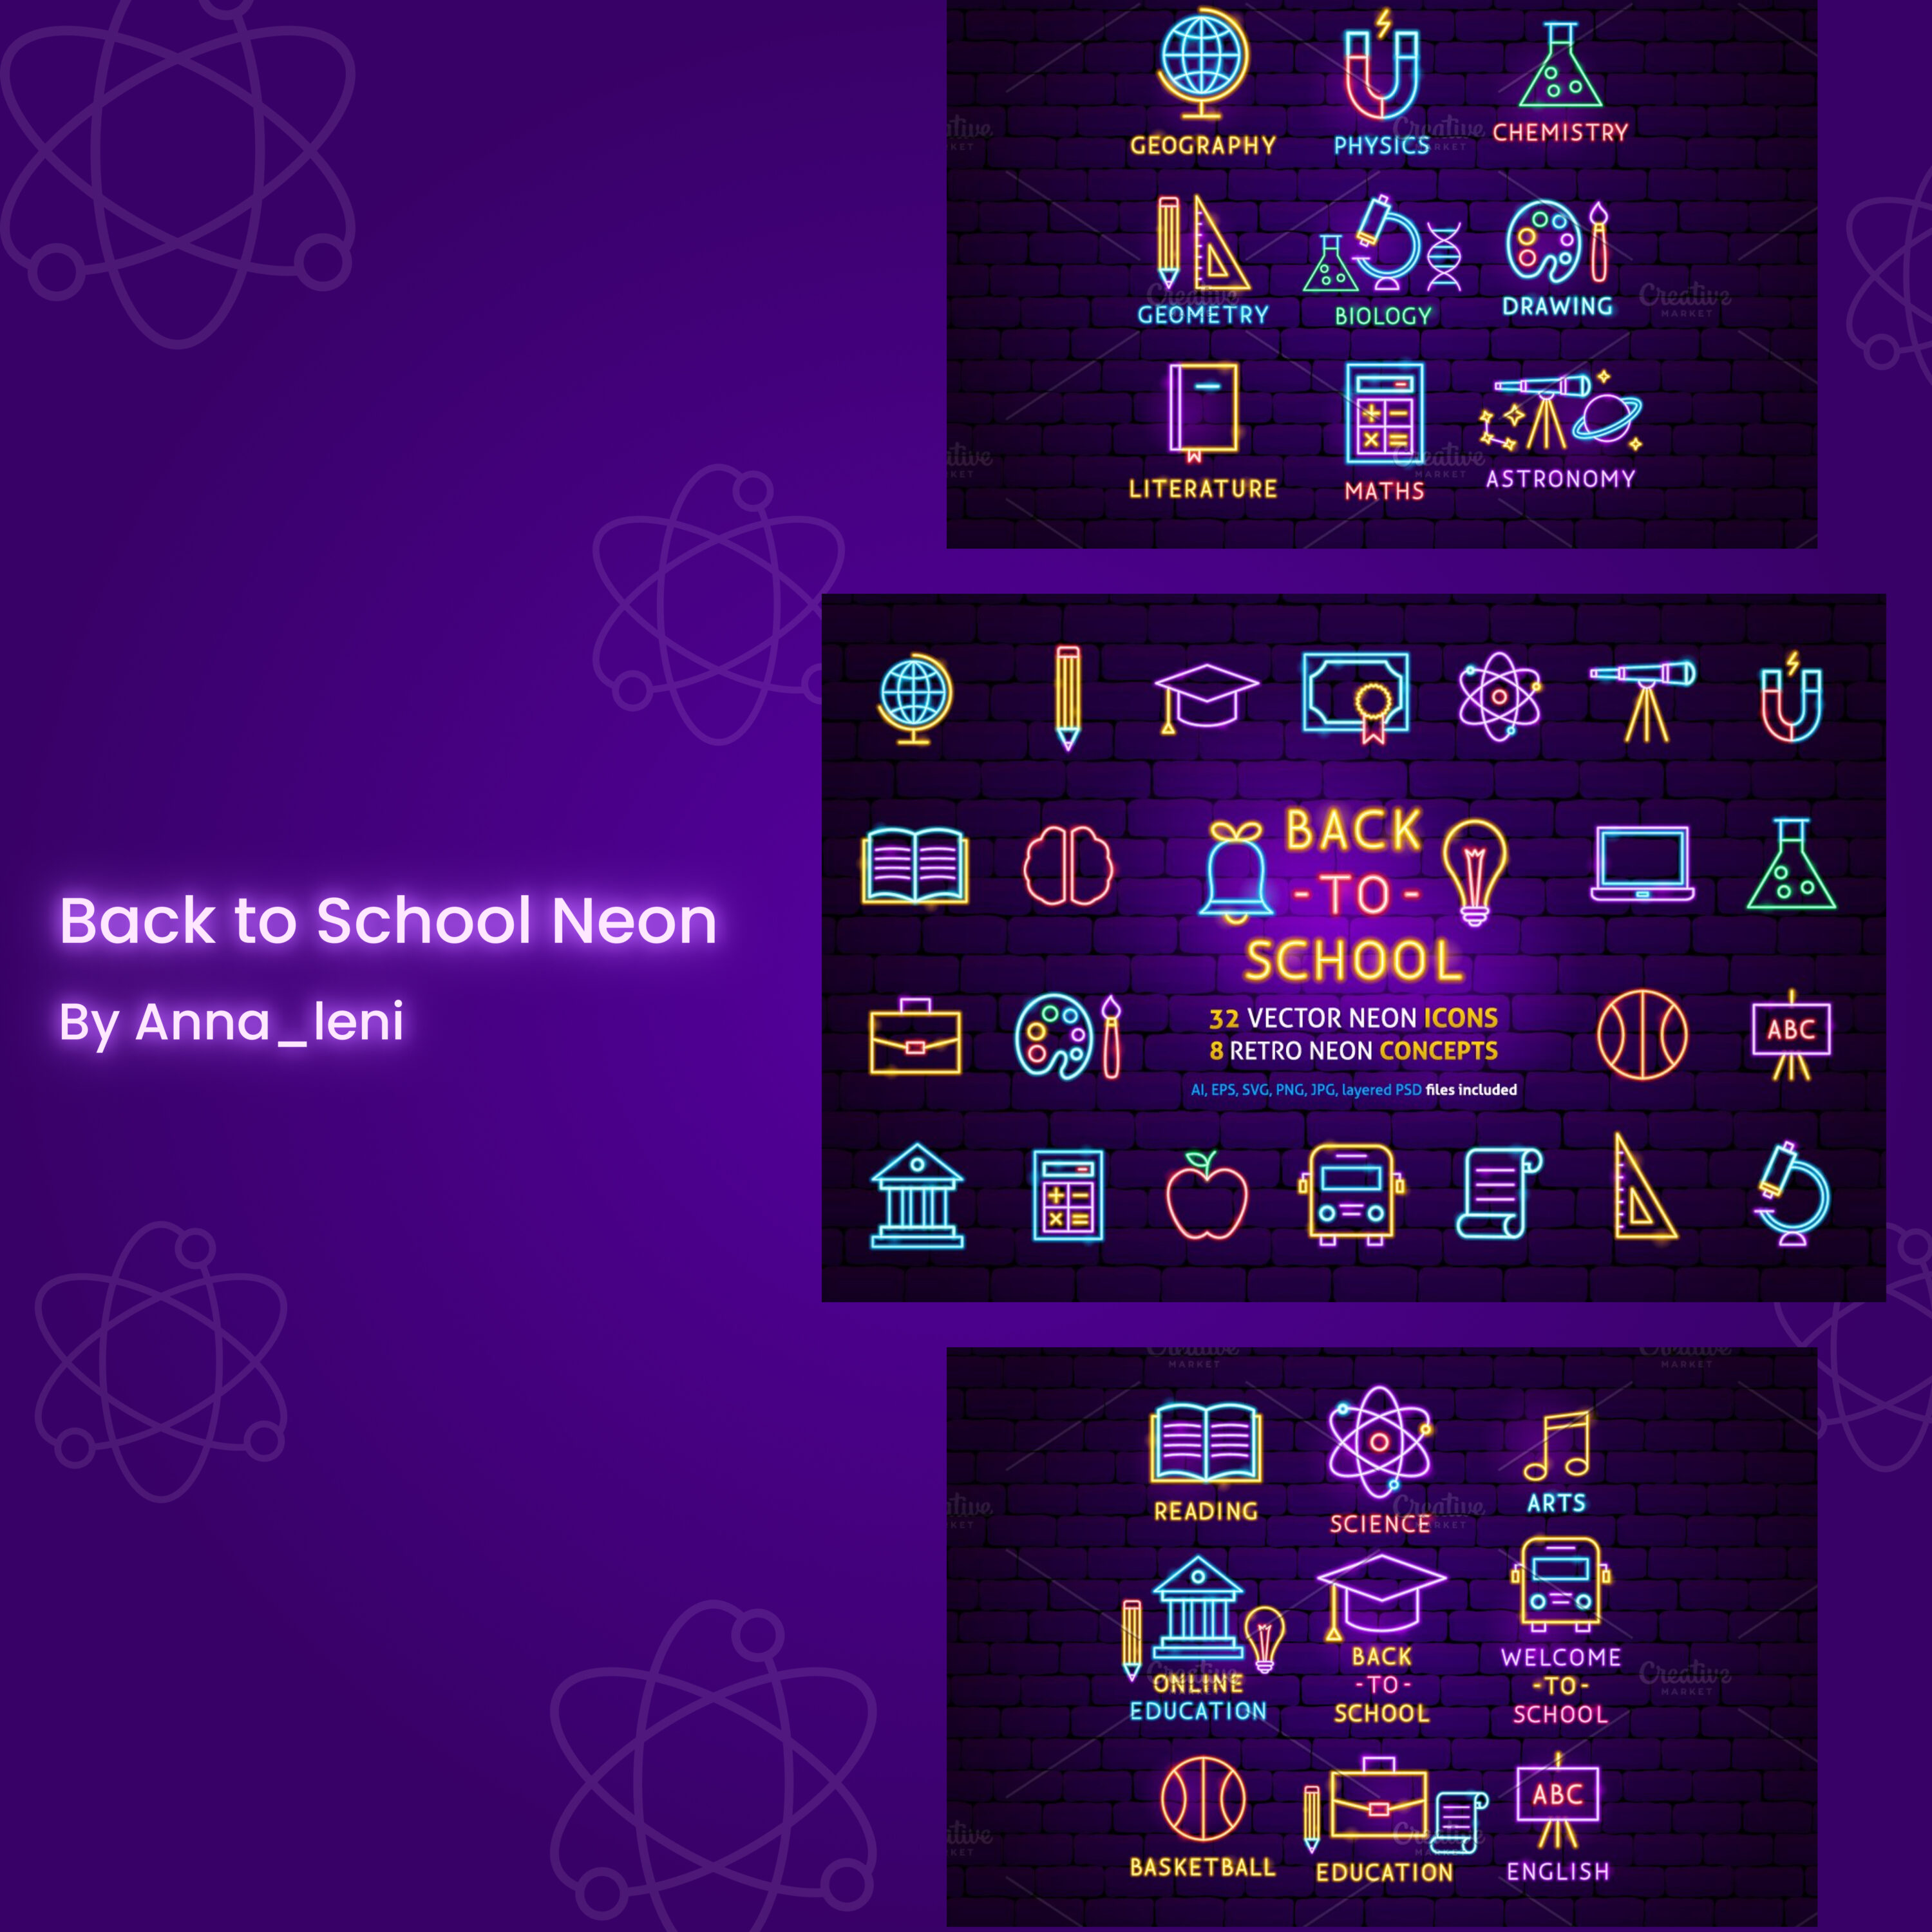 Back to school neon preview.